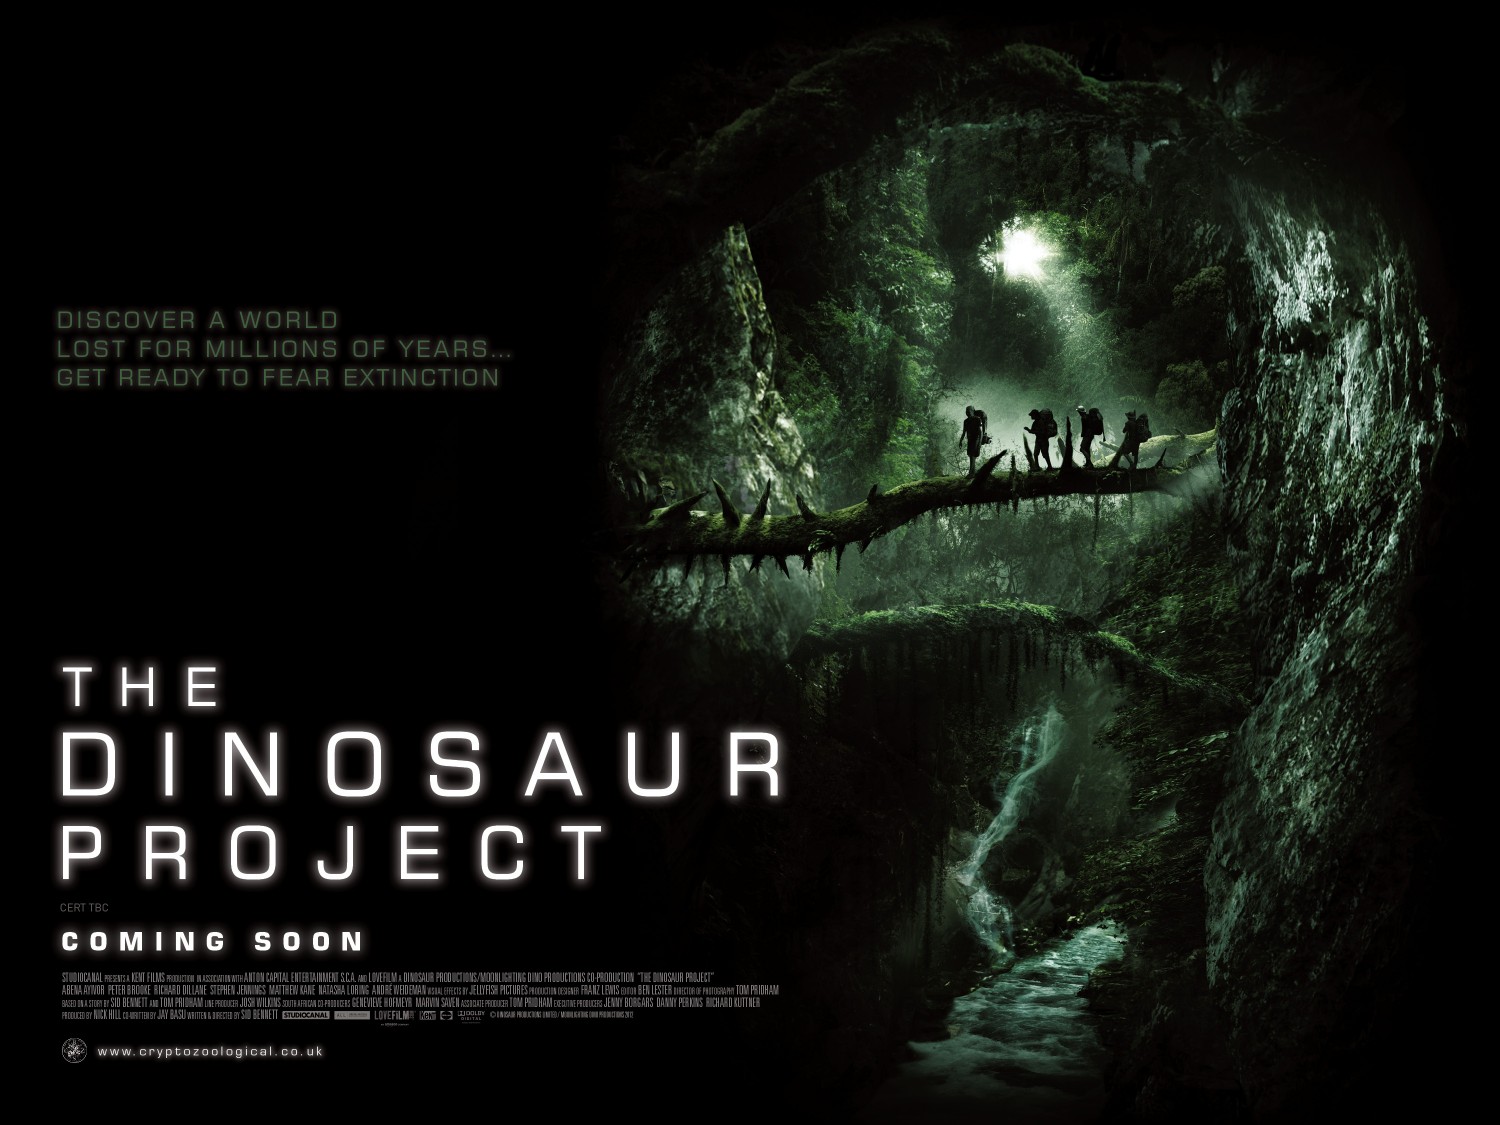 Dinosaur Project Baby: Secret of the lost legend Mokele-mbembe Movies